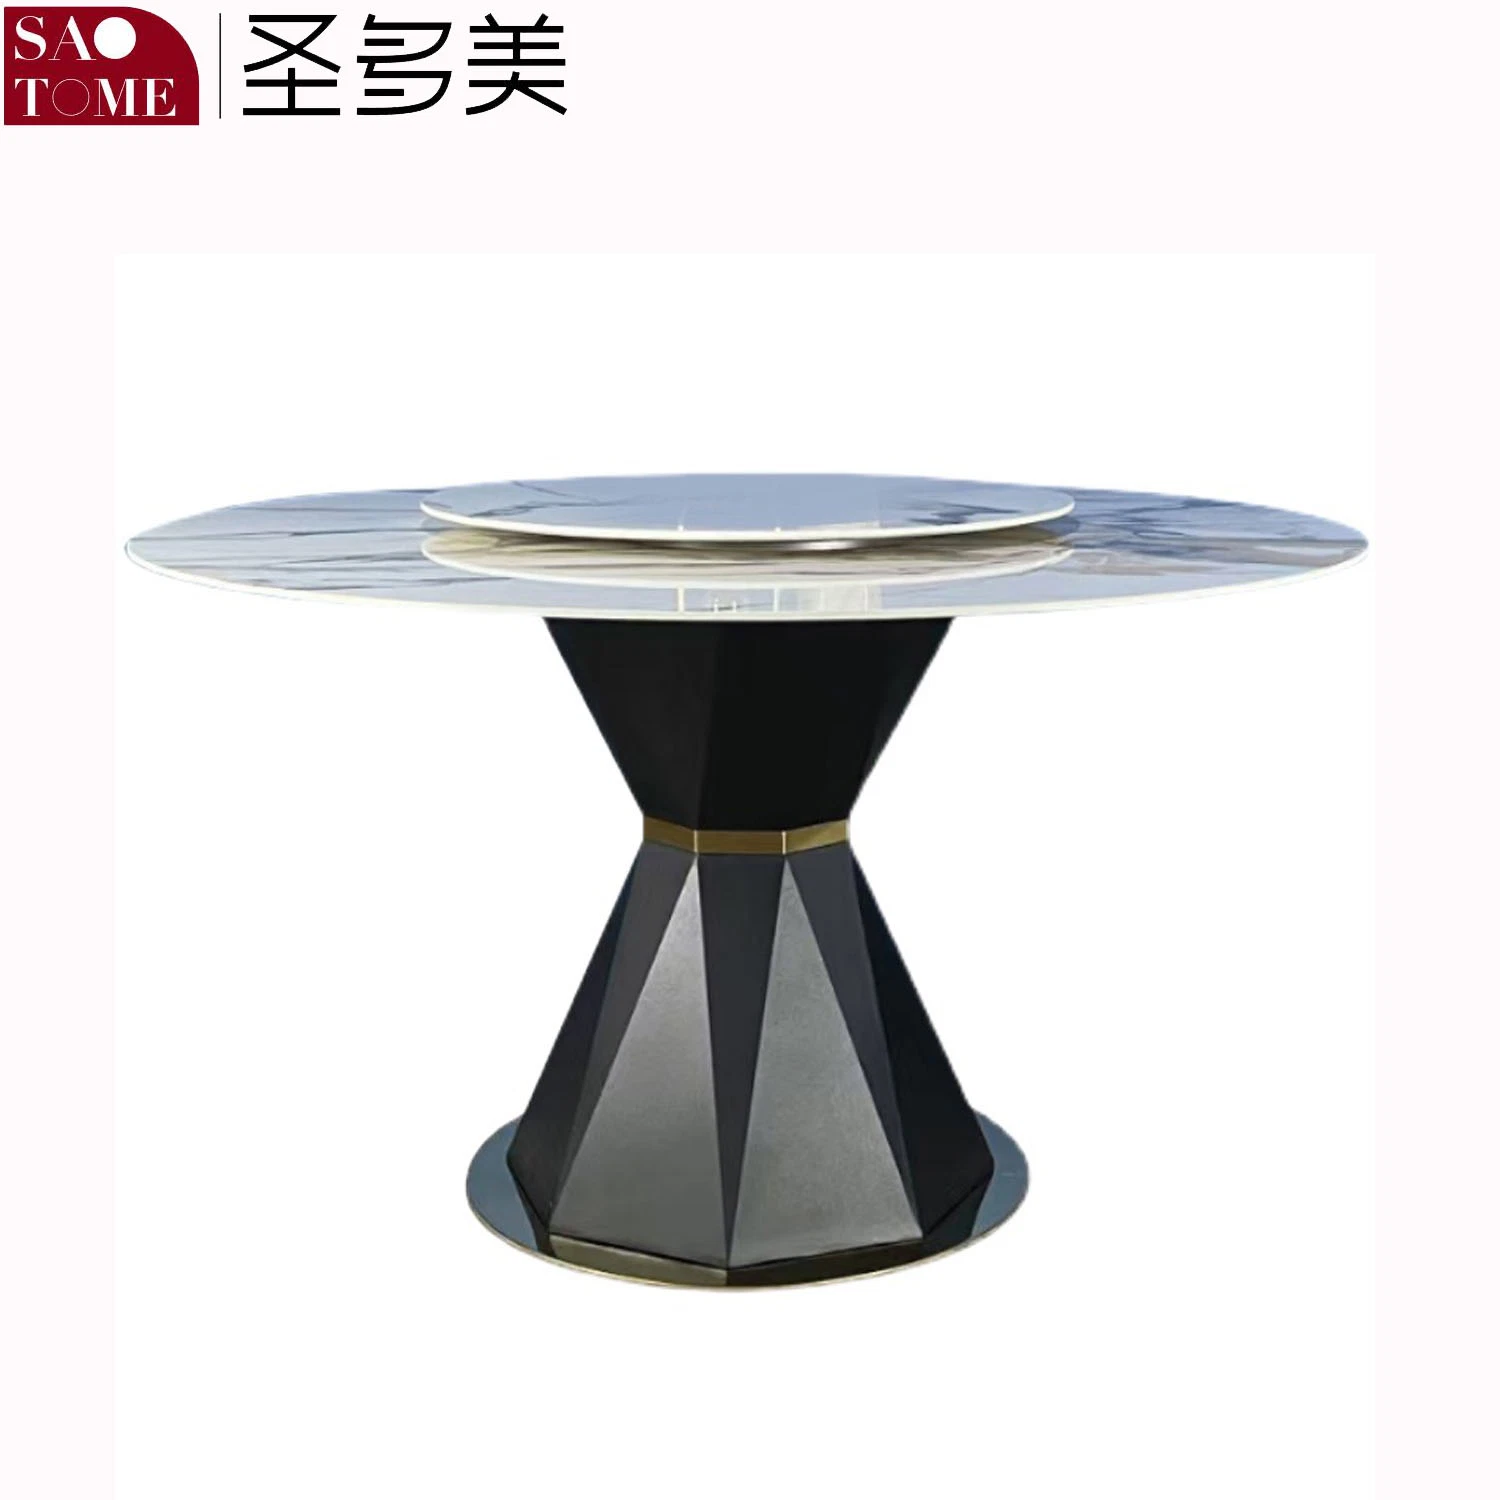 Modern Home Hotel Furniture with Turntable Round Dining Table